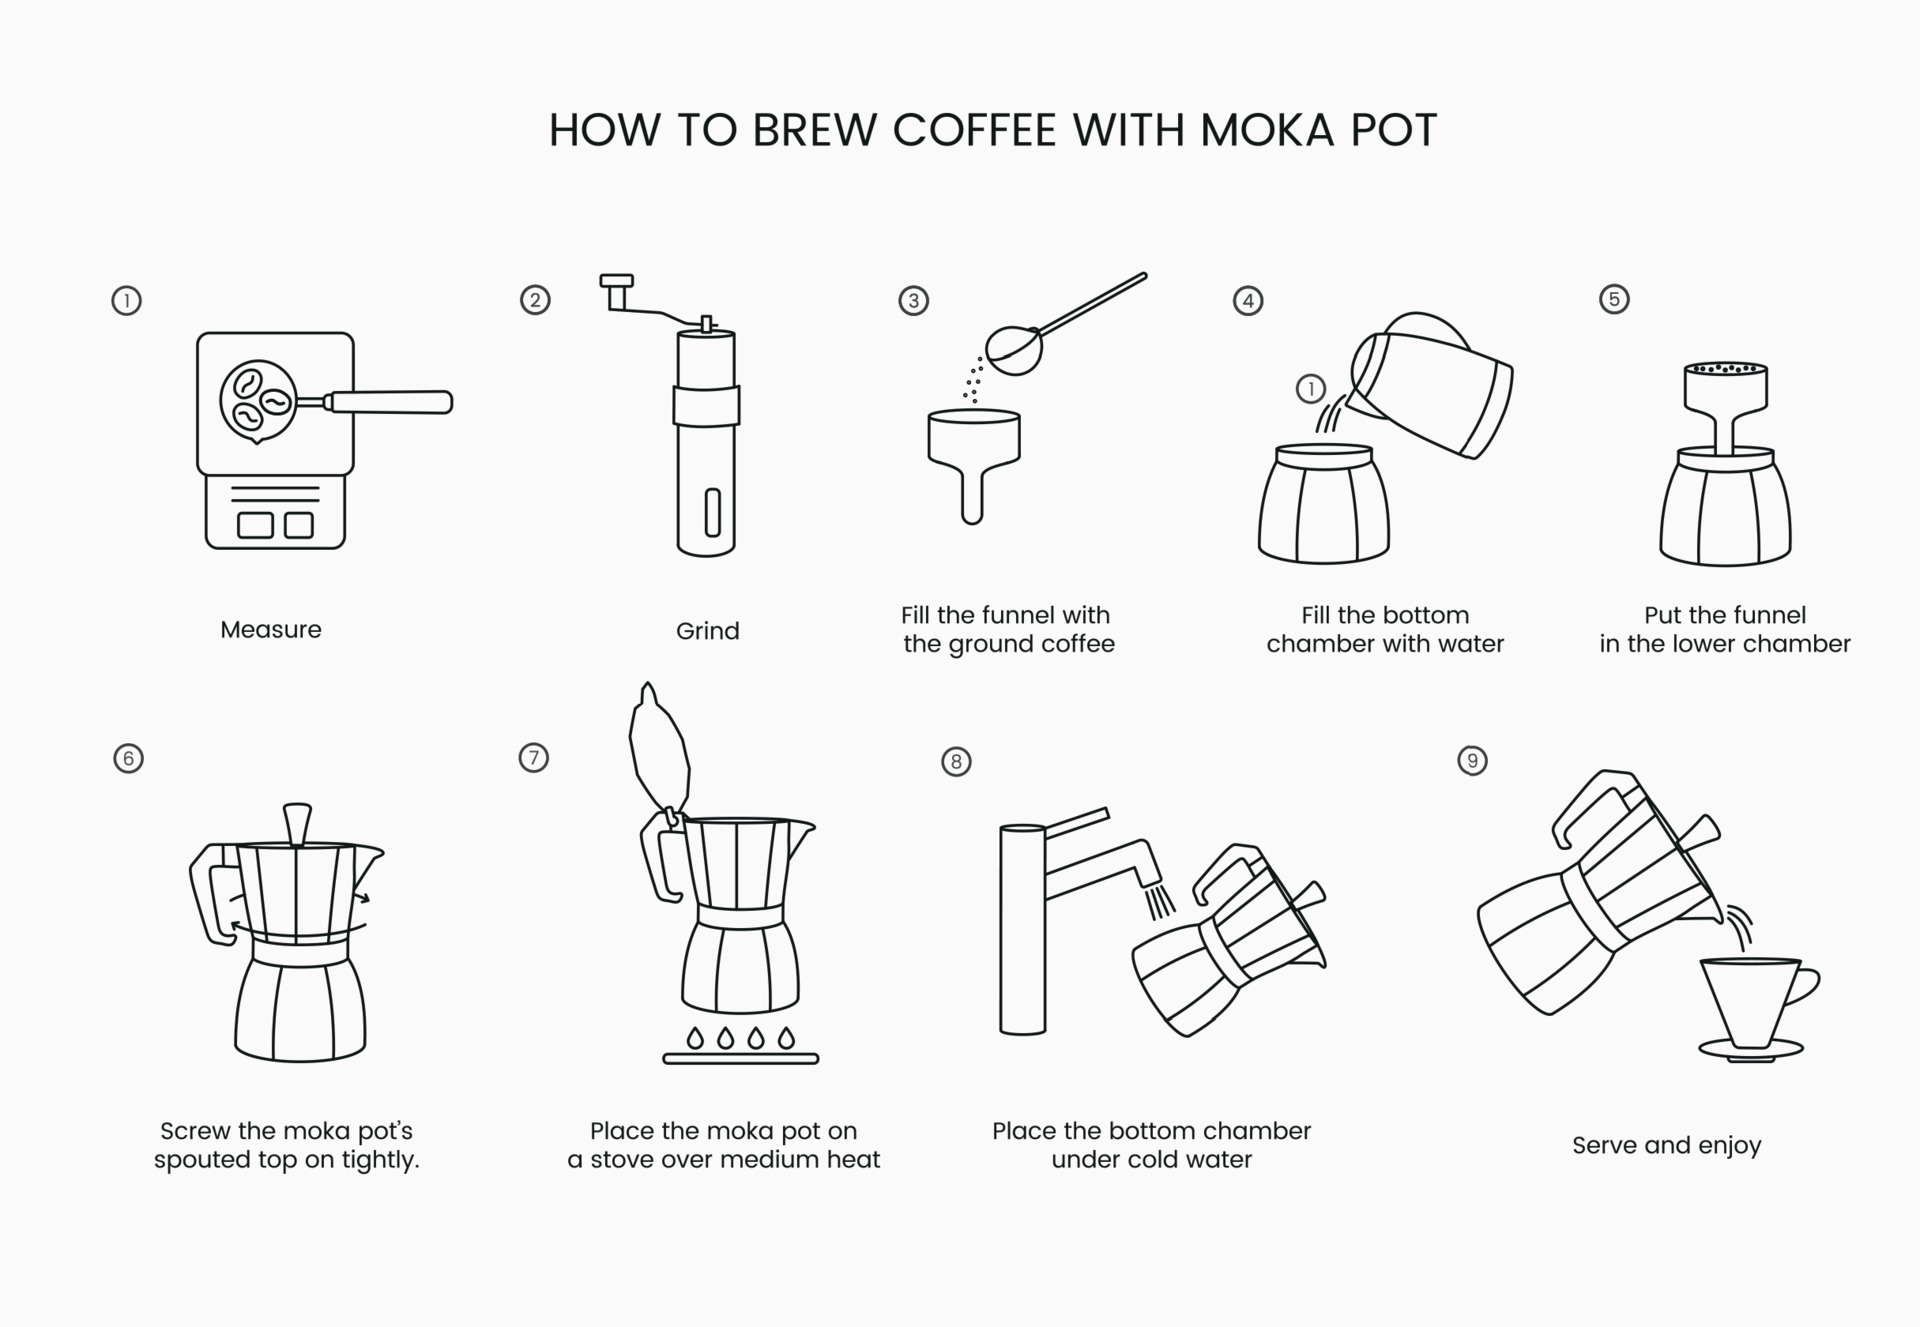 https://static.vecteezy.com/system/resources/previews/024/694/313/original/moka-pot-instructions-for-brewing-coffee-linear-icon-vector.jpg